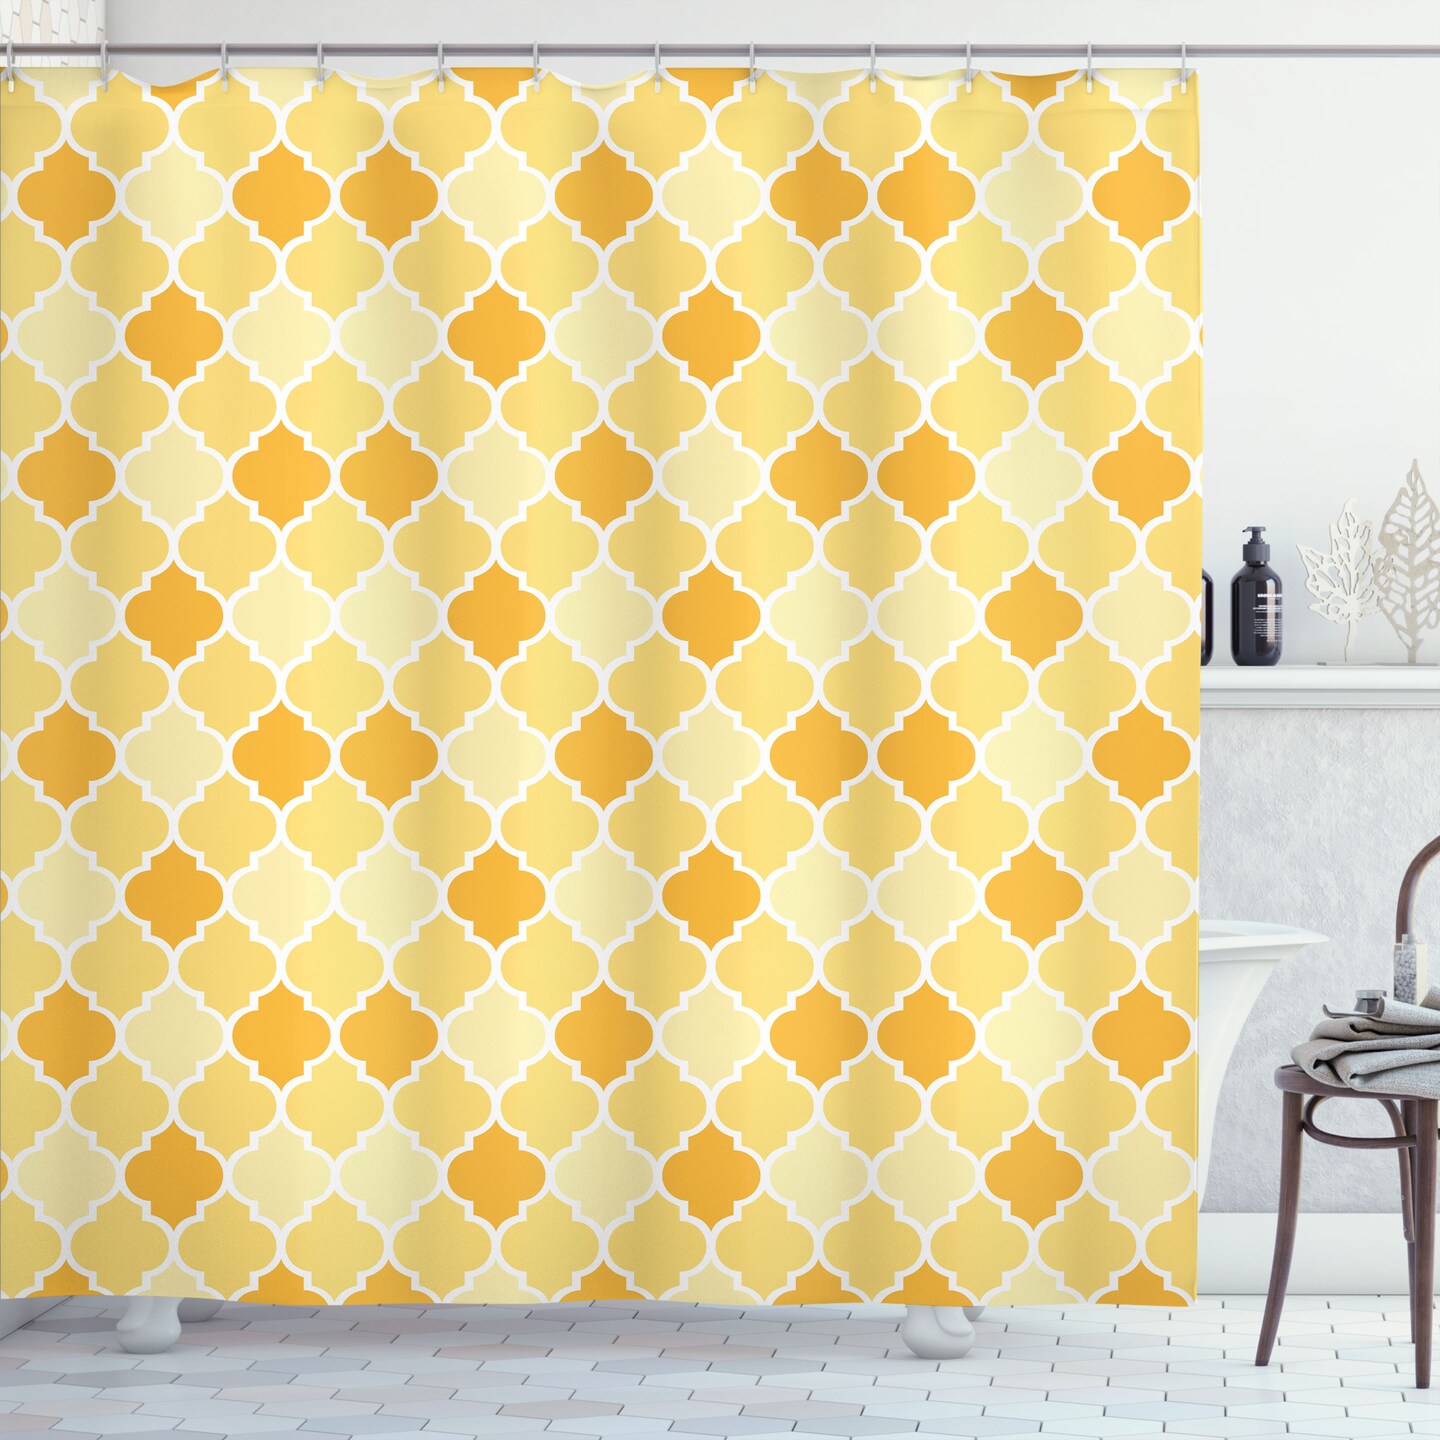 Ambesonne Quatrefoil Shower Curtain, Age-Old Trellis Pattern in The Shades  of Yellow Historical Eastern, Cloth Fabric Bathroom Decor Set with Hooks,  69 W x 70 L, Marigold Mustard